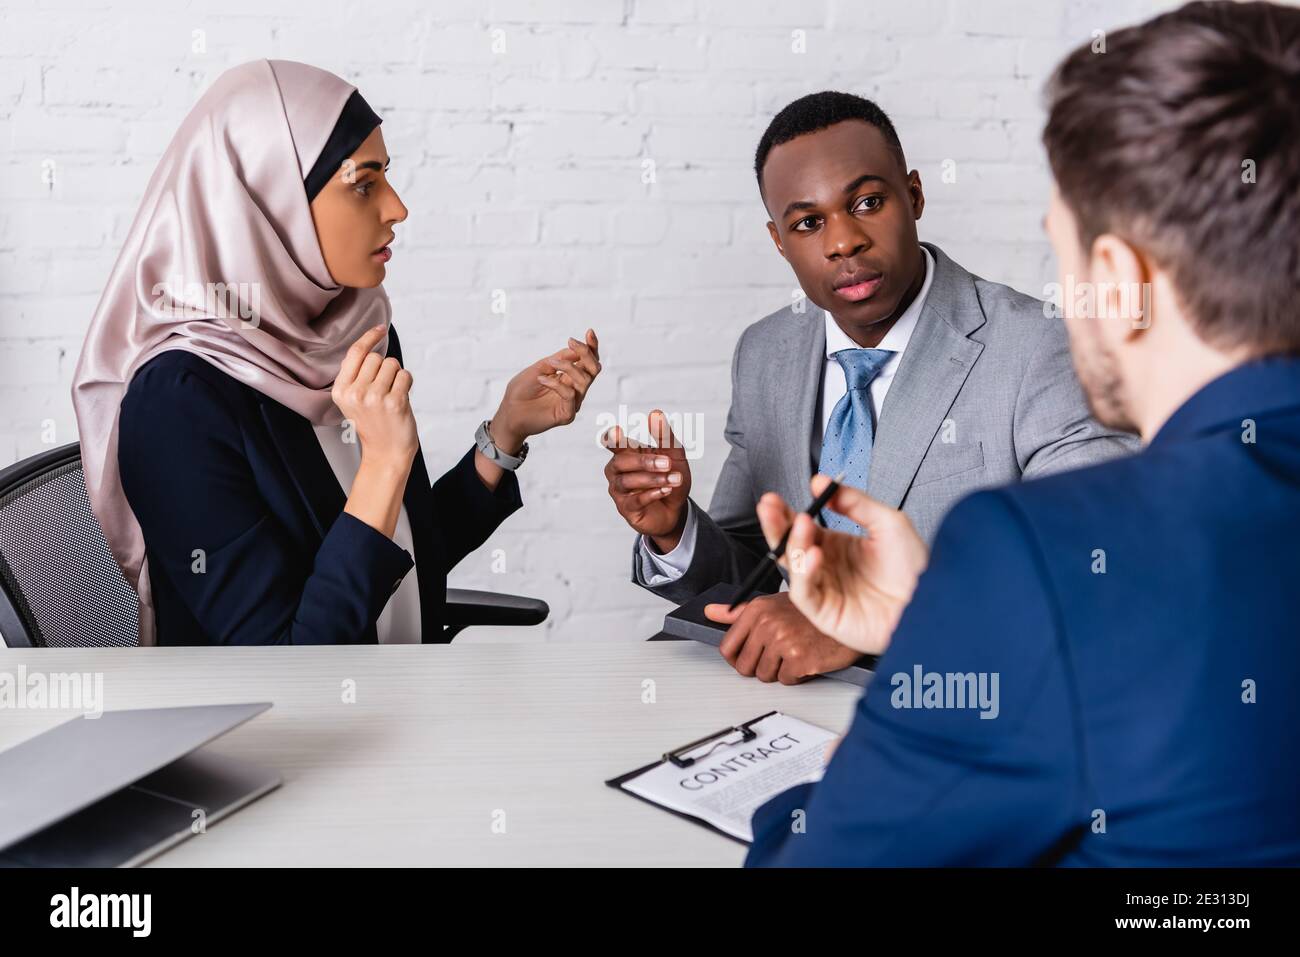 multicultural businesspeople gesturing while discussing contract near interpreter, blurred foreground Stock Photo